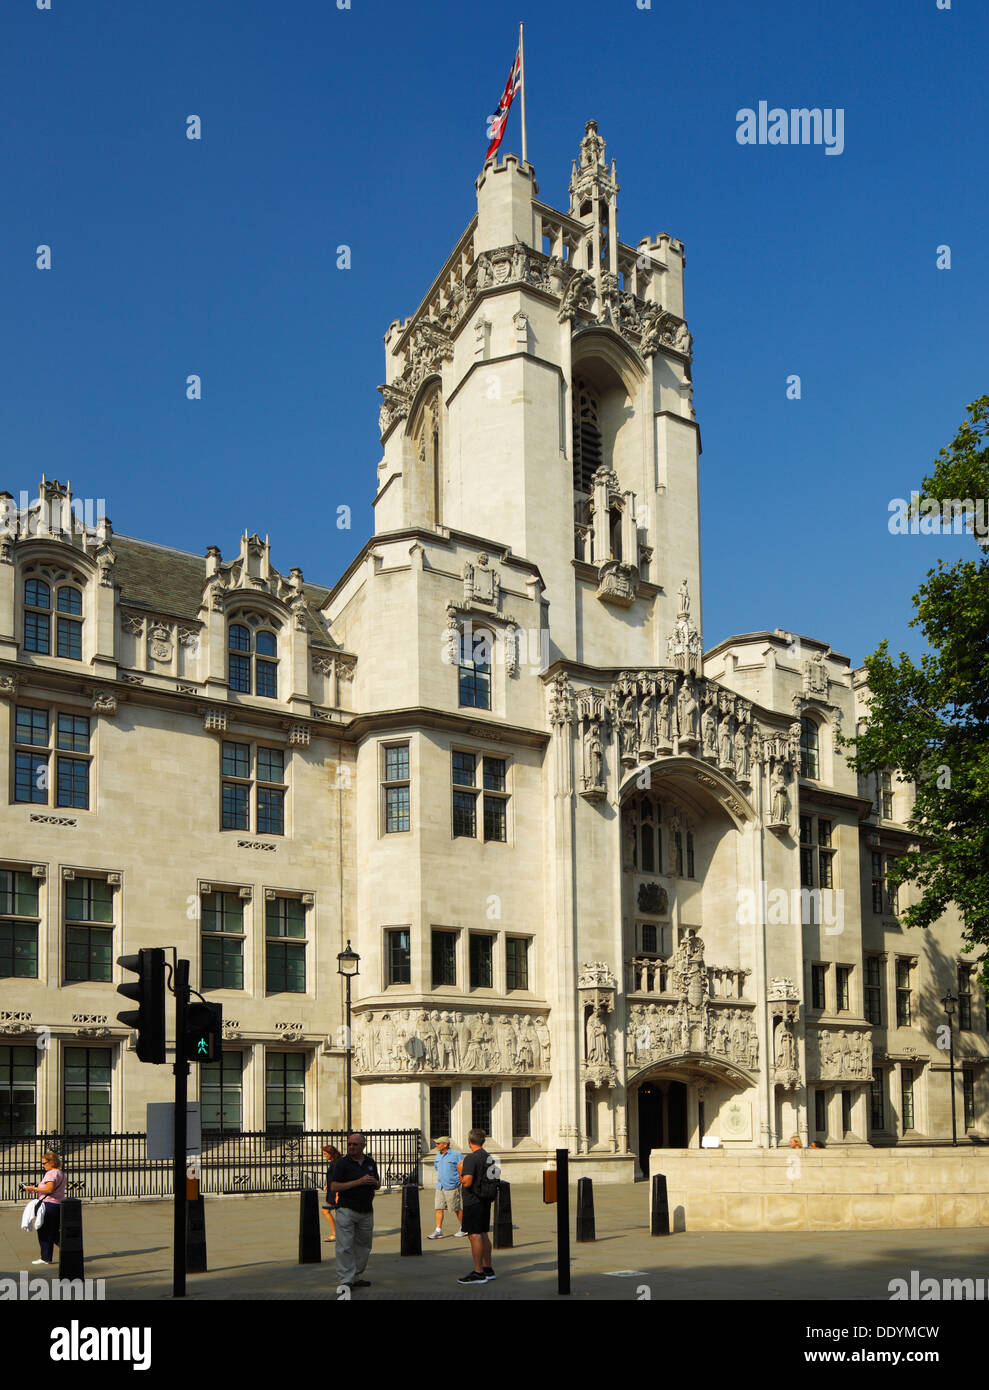 The Middlesex Guildhall, the location of the Supreme Court, Parliament Square, London. Stock Photo